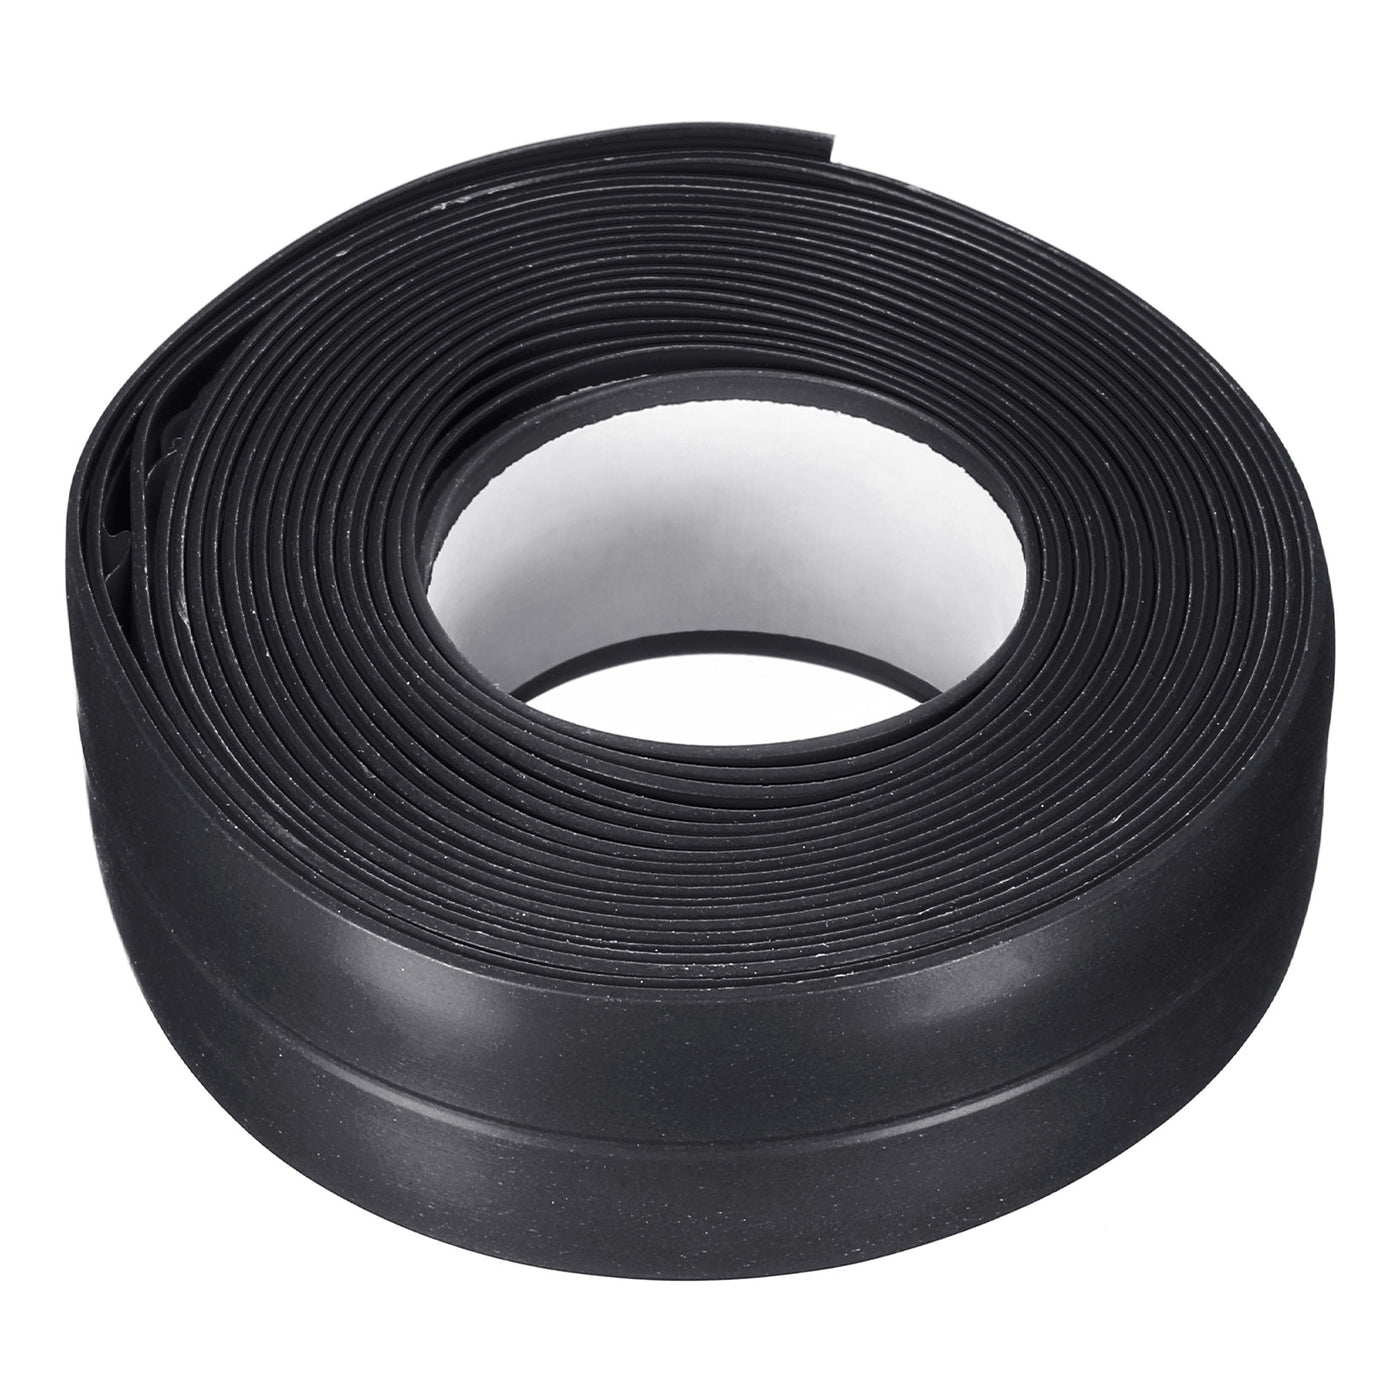 uxcell Uxcell Waterproof Seal Caulk Strip Tape Self Adhesive PVC Sealing Tape for Kitchen Bathroom